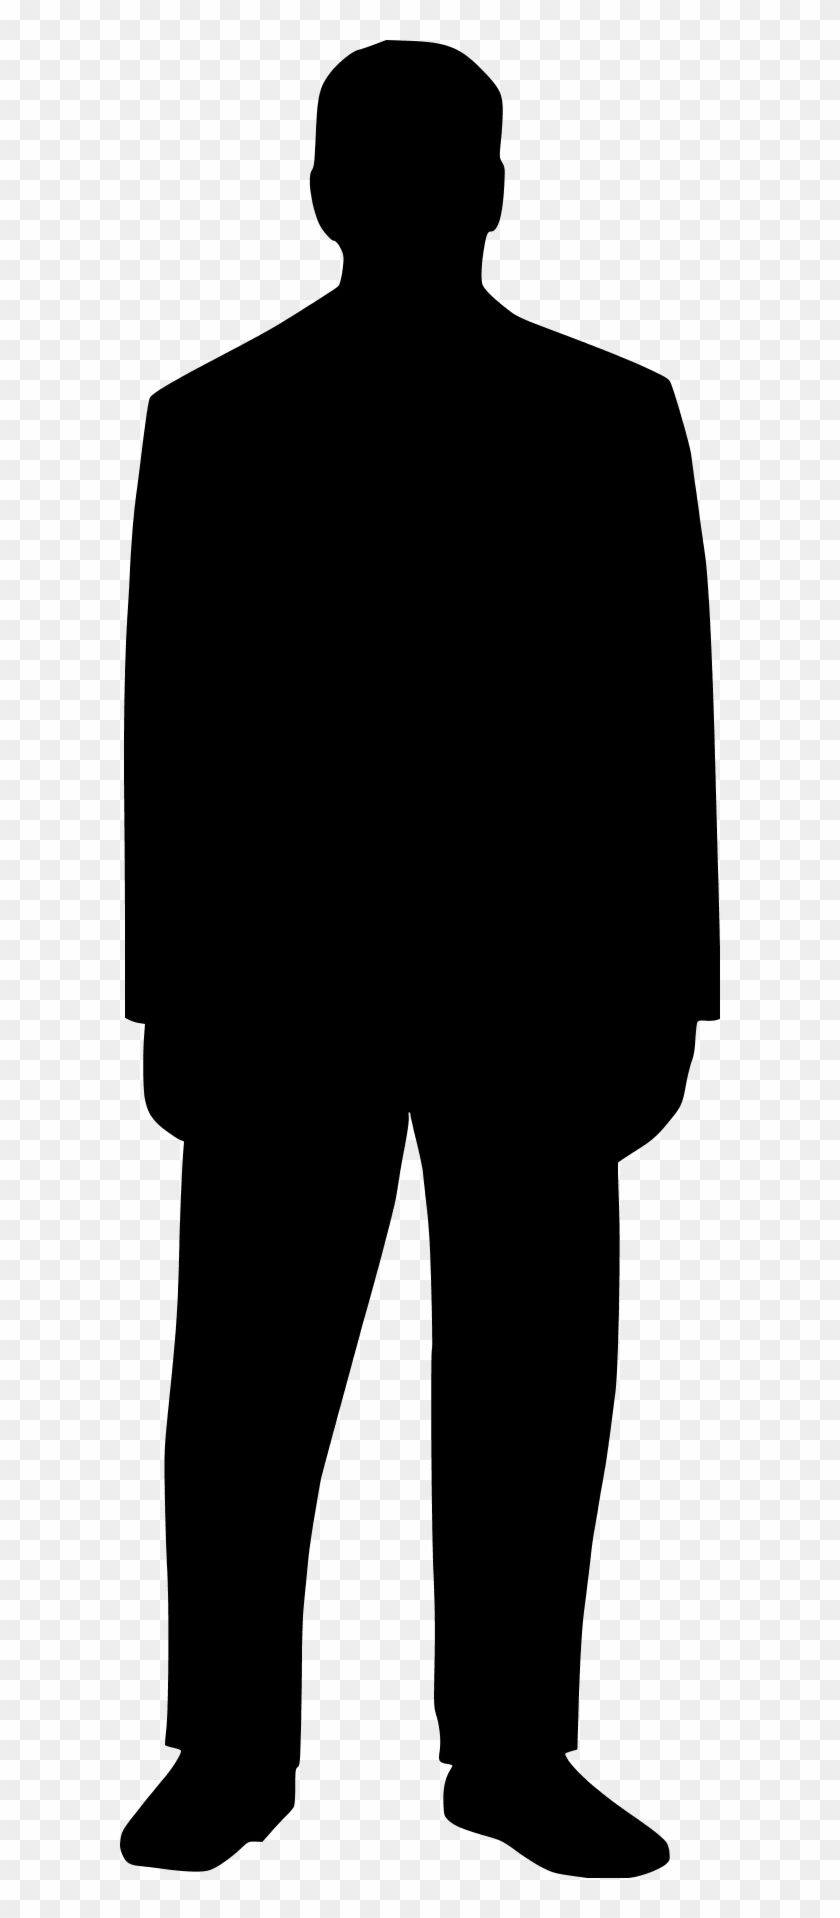 Man Standing Silhouette Clipart Panda - Outline Of A Man Standing #342195